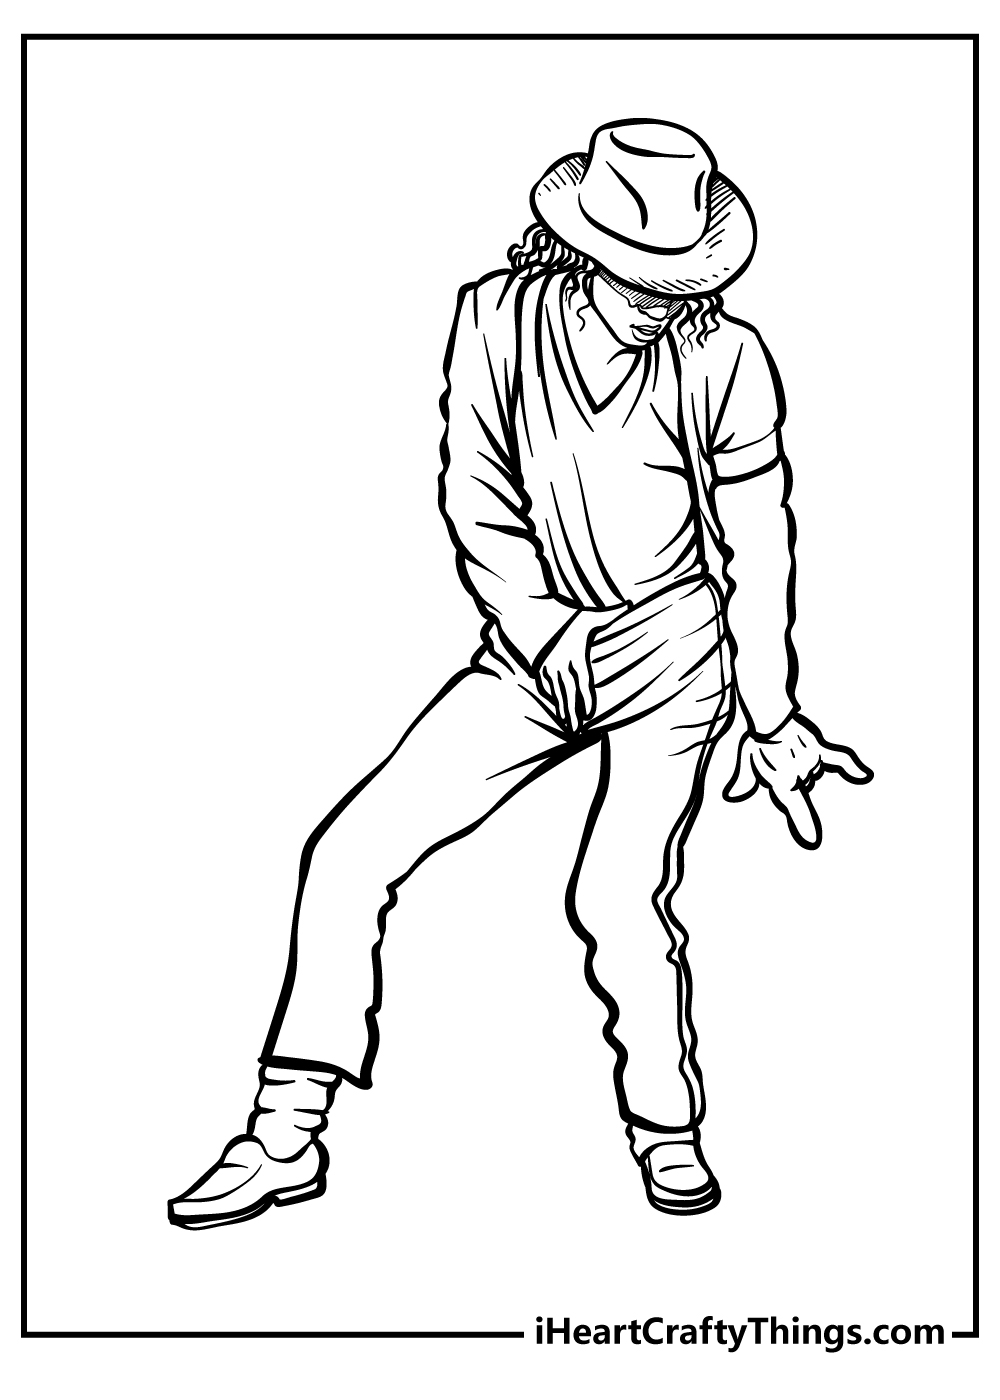 Michael Jackson Coloring Sheet for children free download